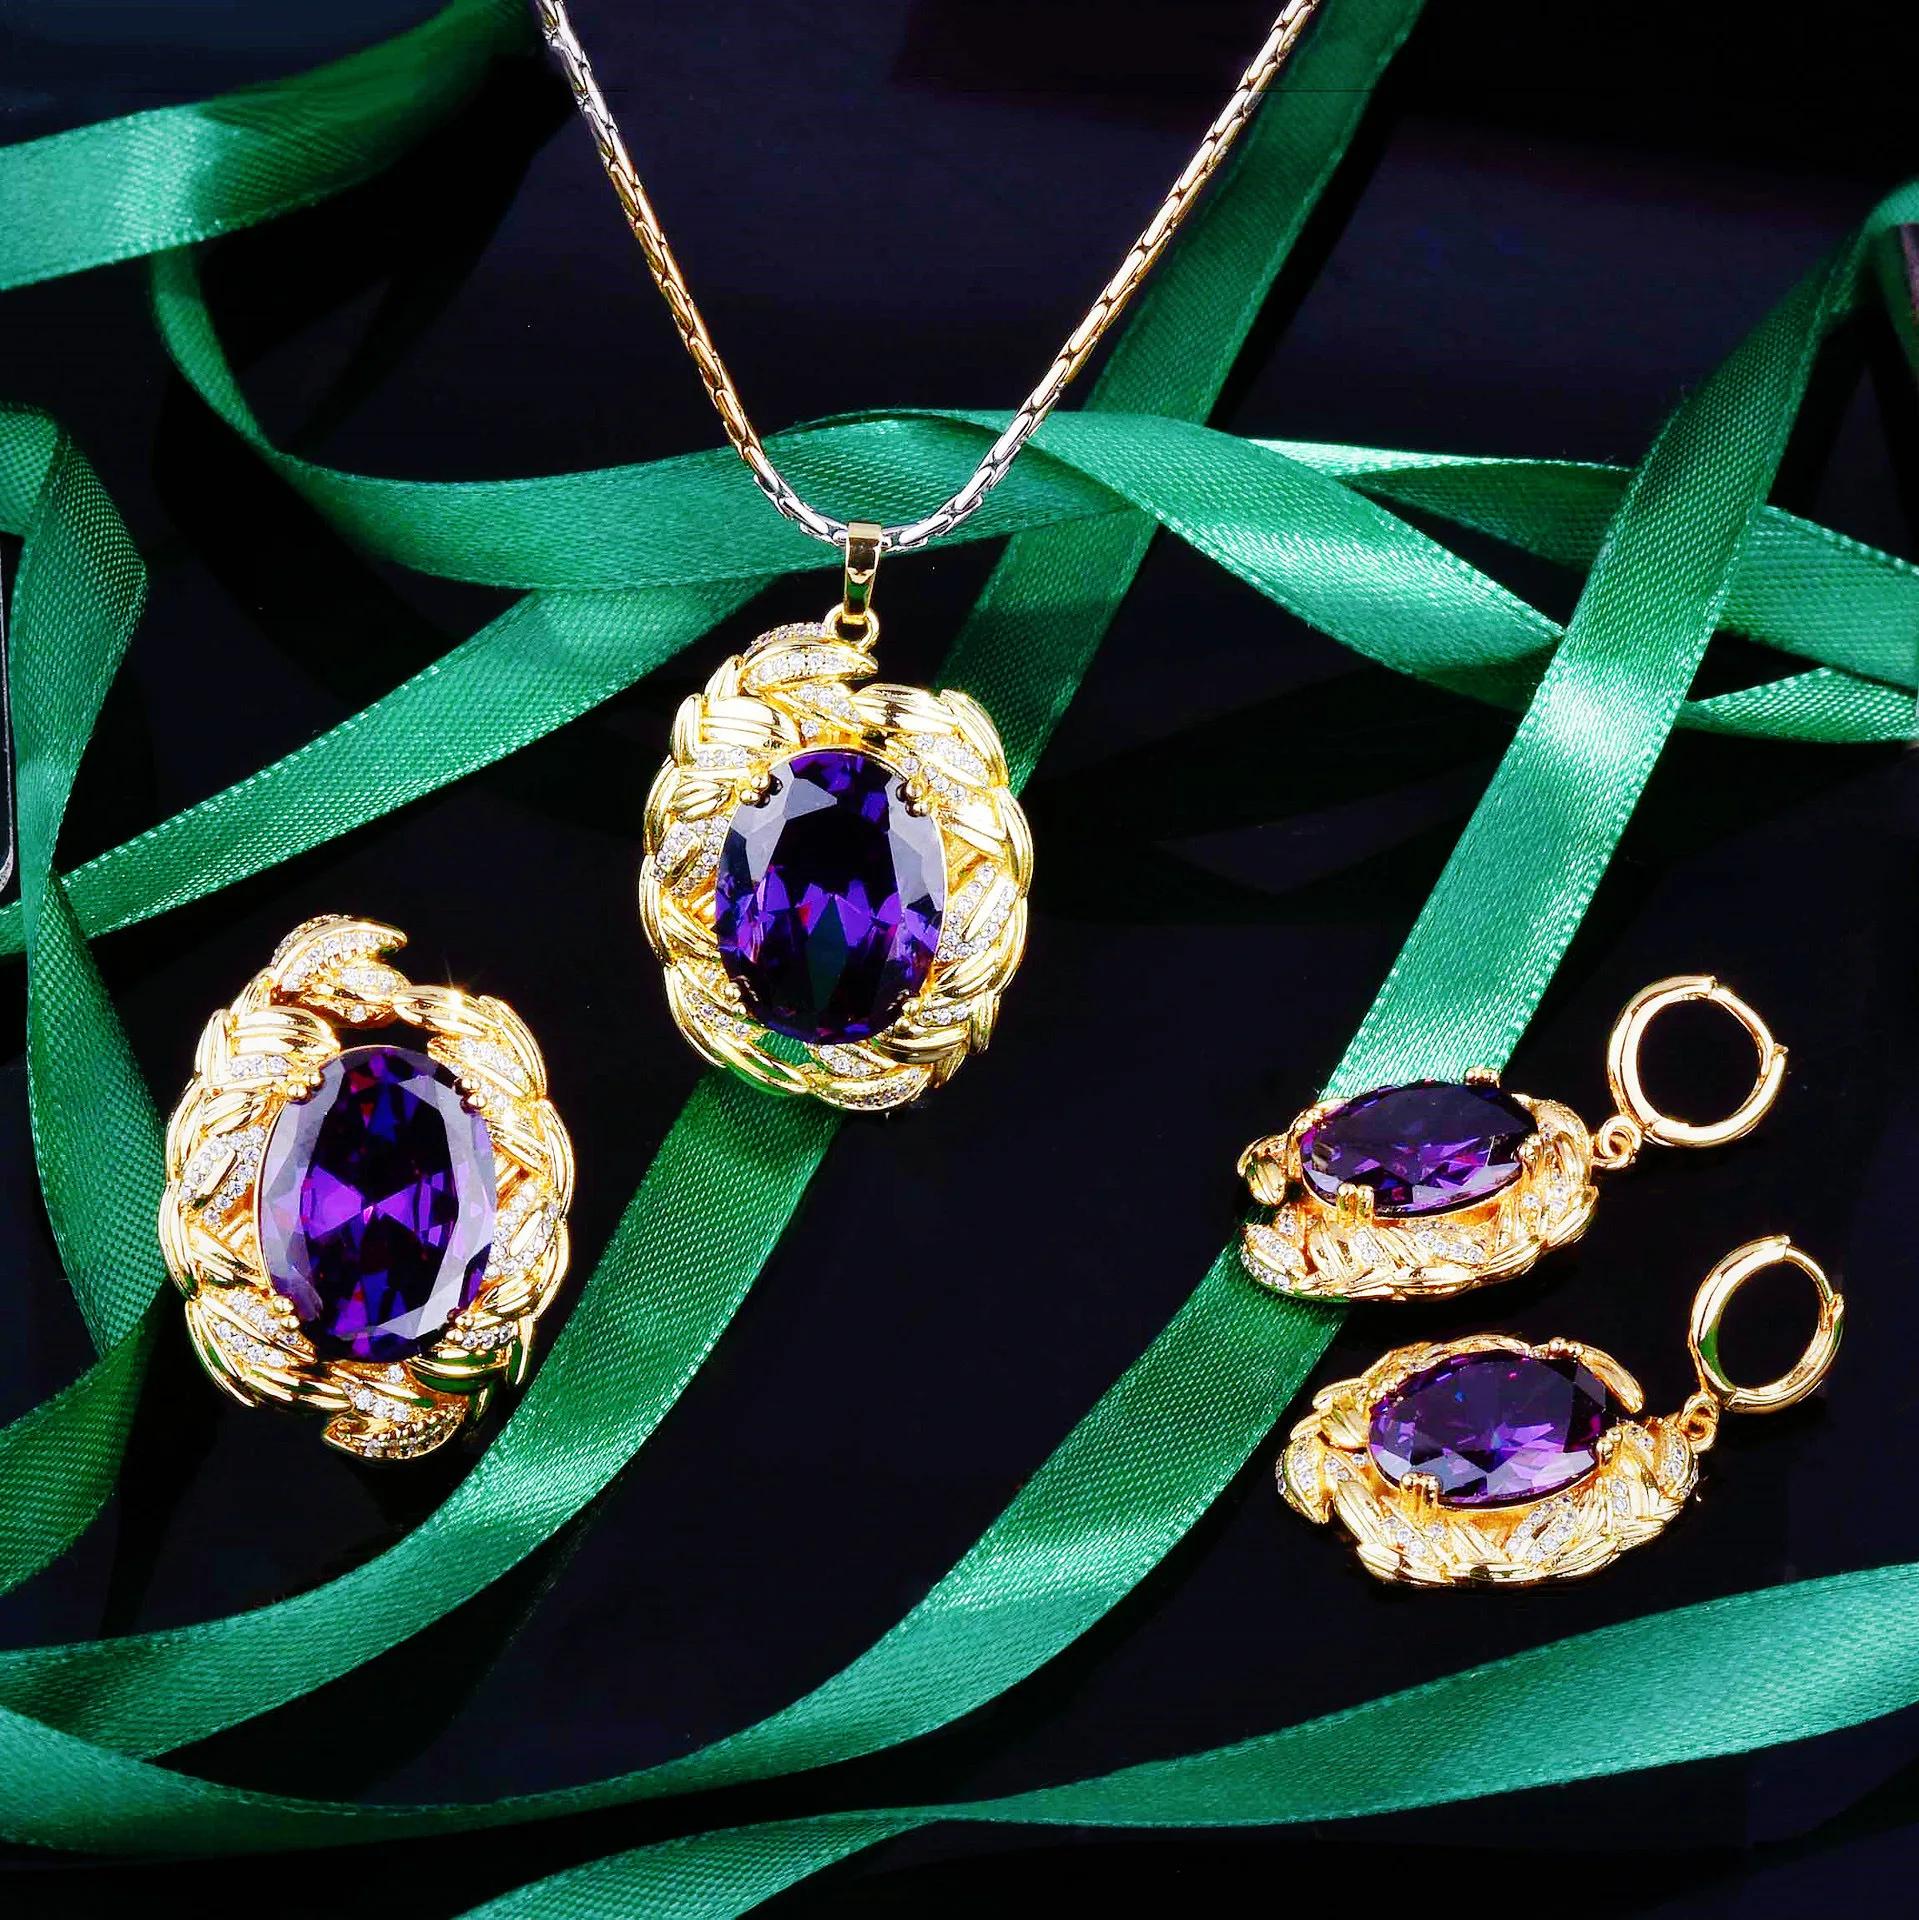 Luxury Mysterious Gold Color Jewelry Sets For Women Large Purple Stone Pendant Necklaces Rings Wedding Engagement Br